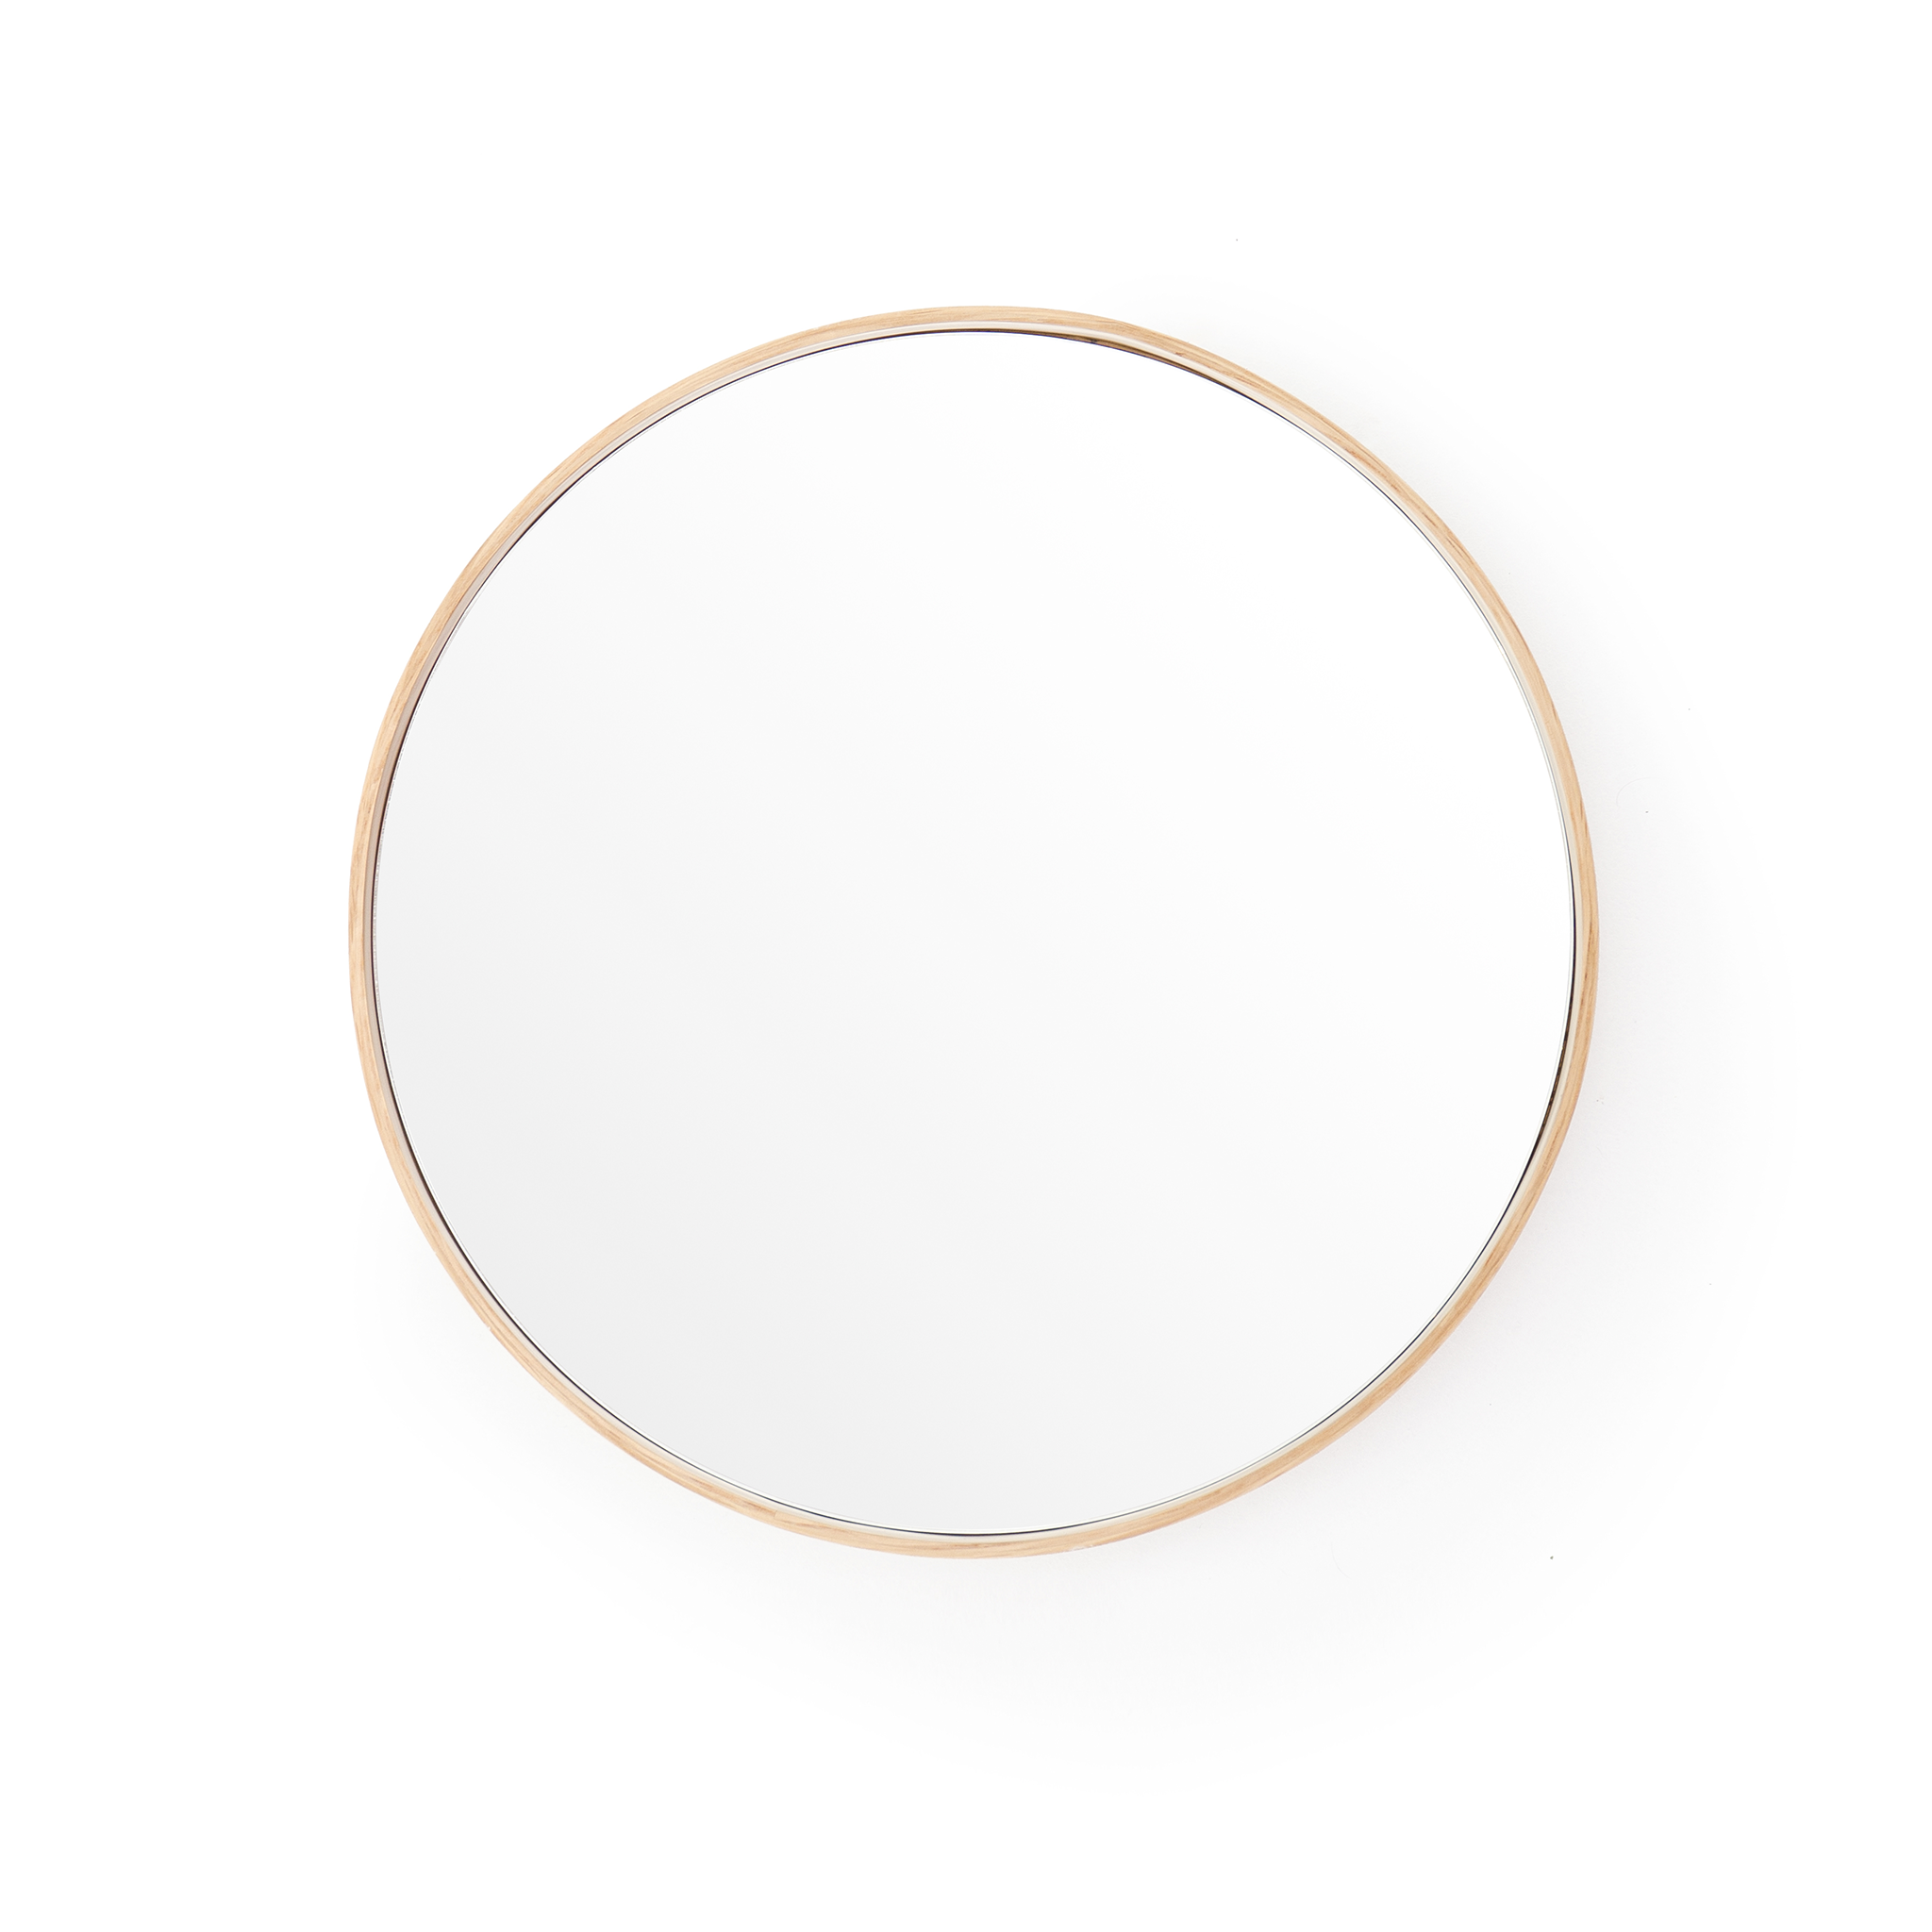 Glance Mirror by Lincoln Rivers for Wireworks